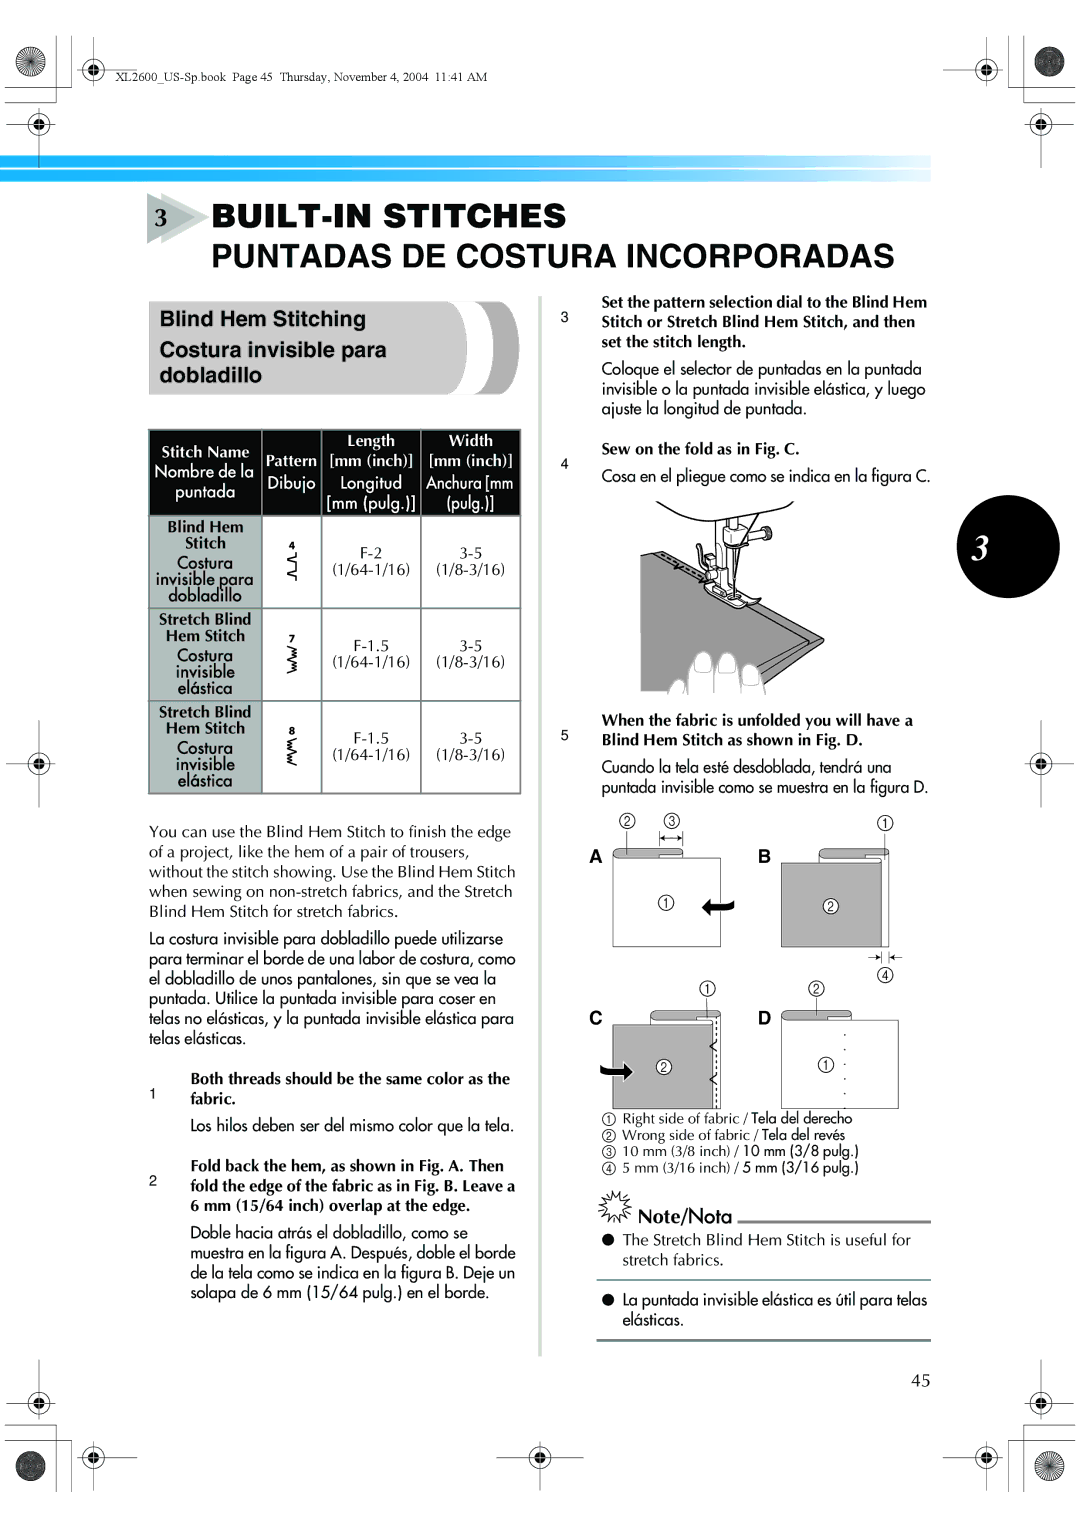 Brother XL-3500 operation manual Blind Hem Stitching Costura invisible para dobladillo, Sew on the fold as in Fig. C 